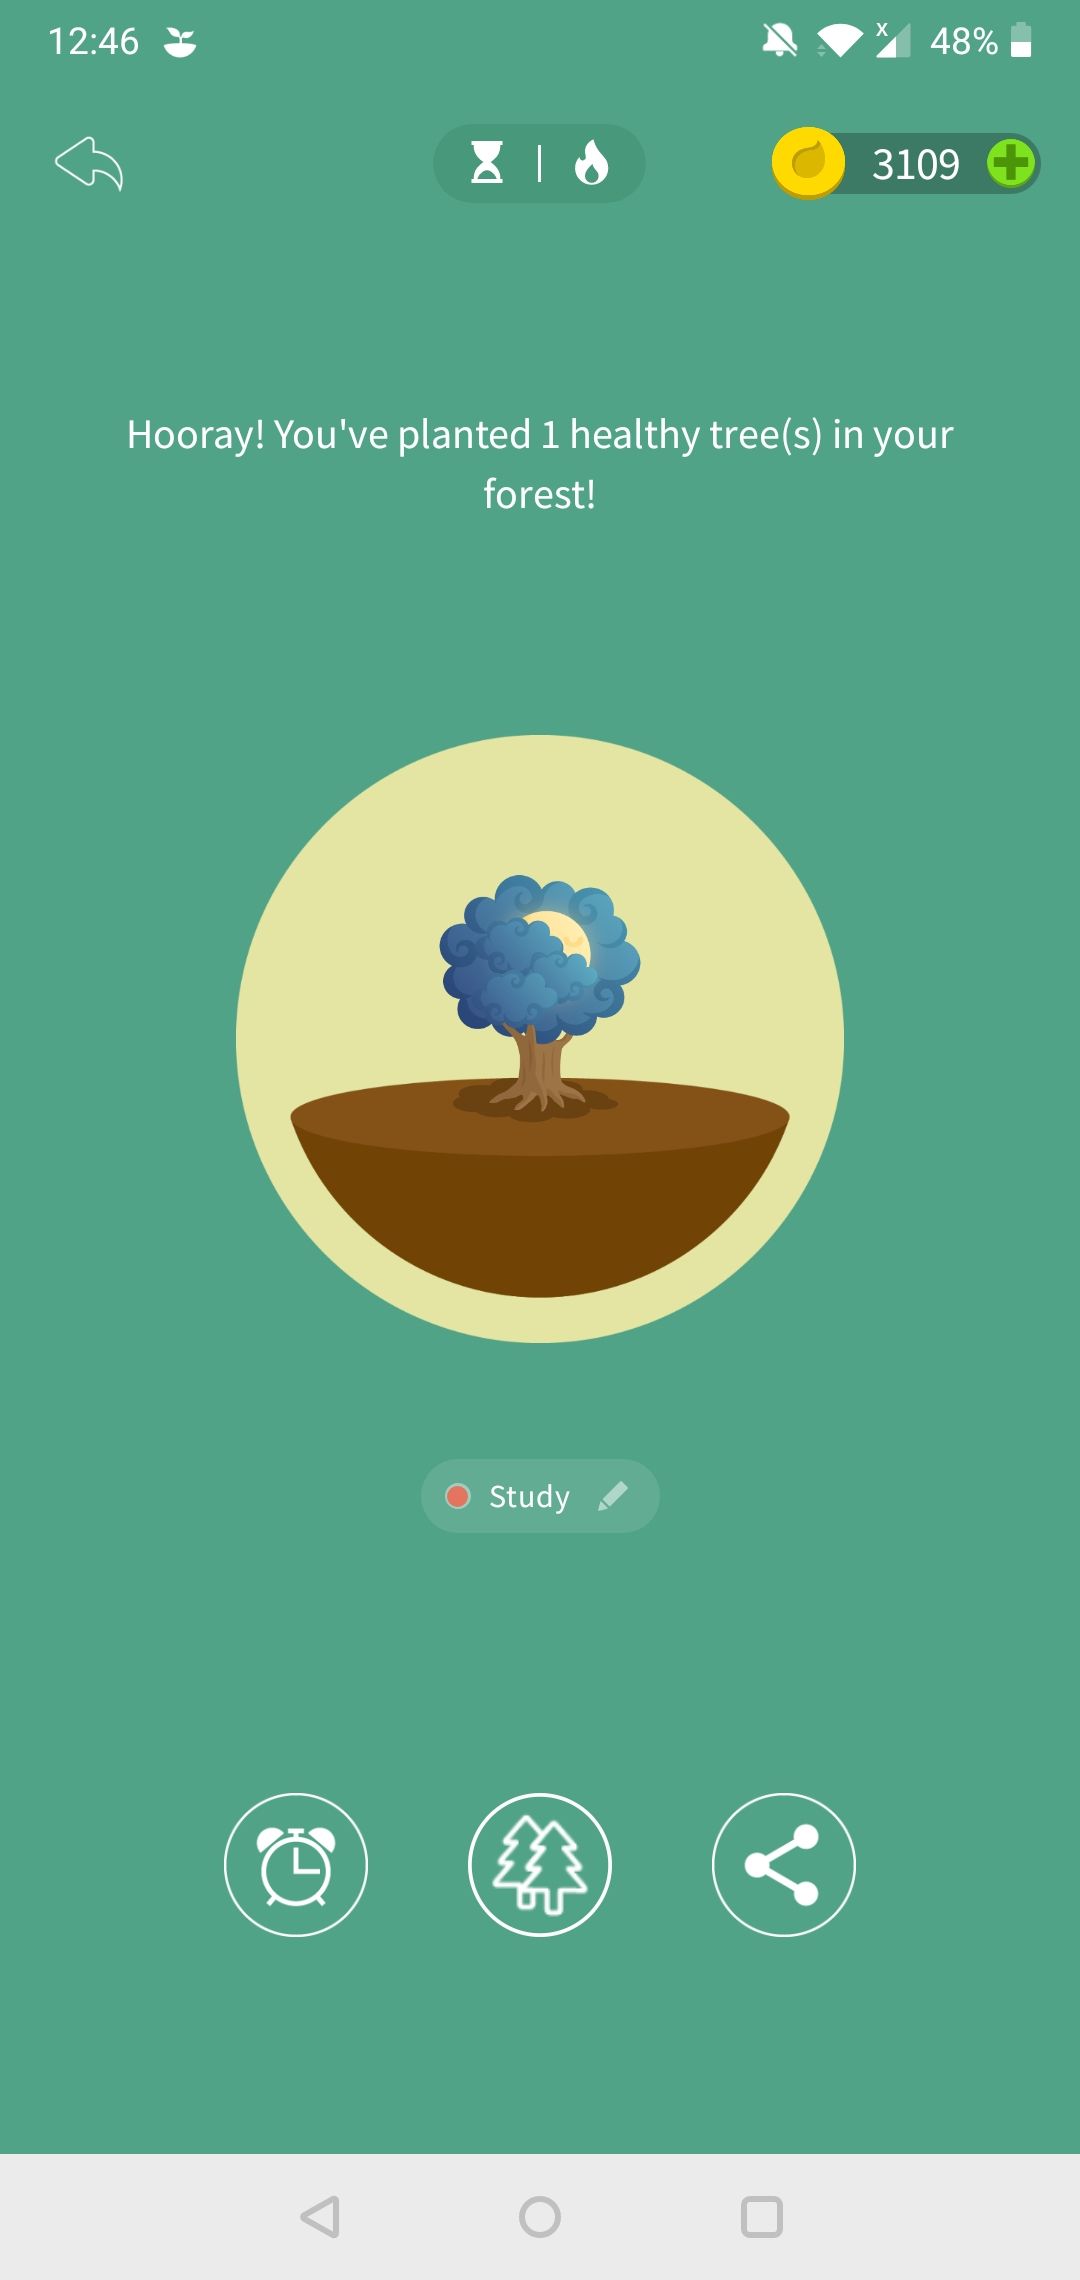 A completed planting session on the Forest Android app, planting one healthy tree.